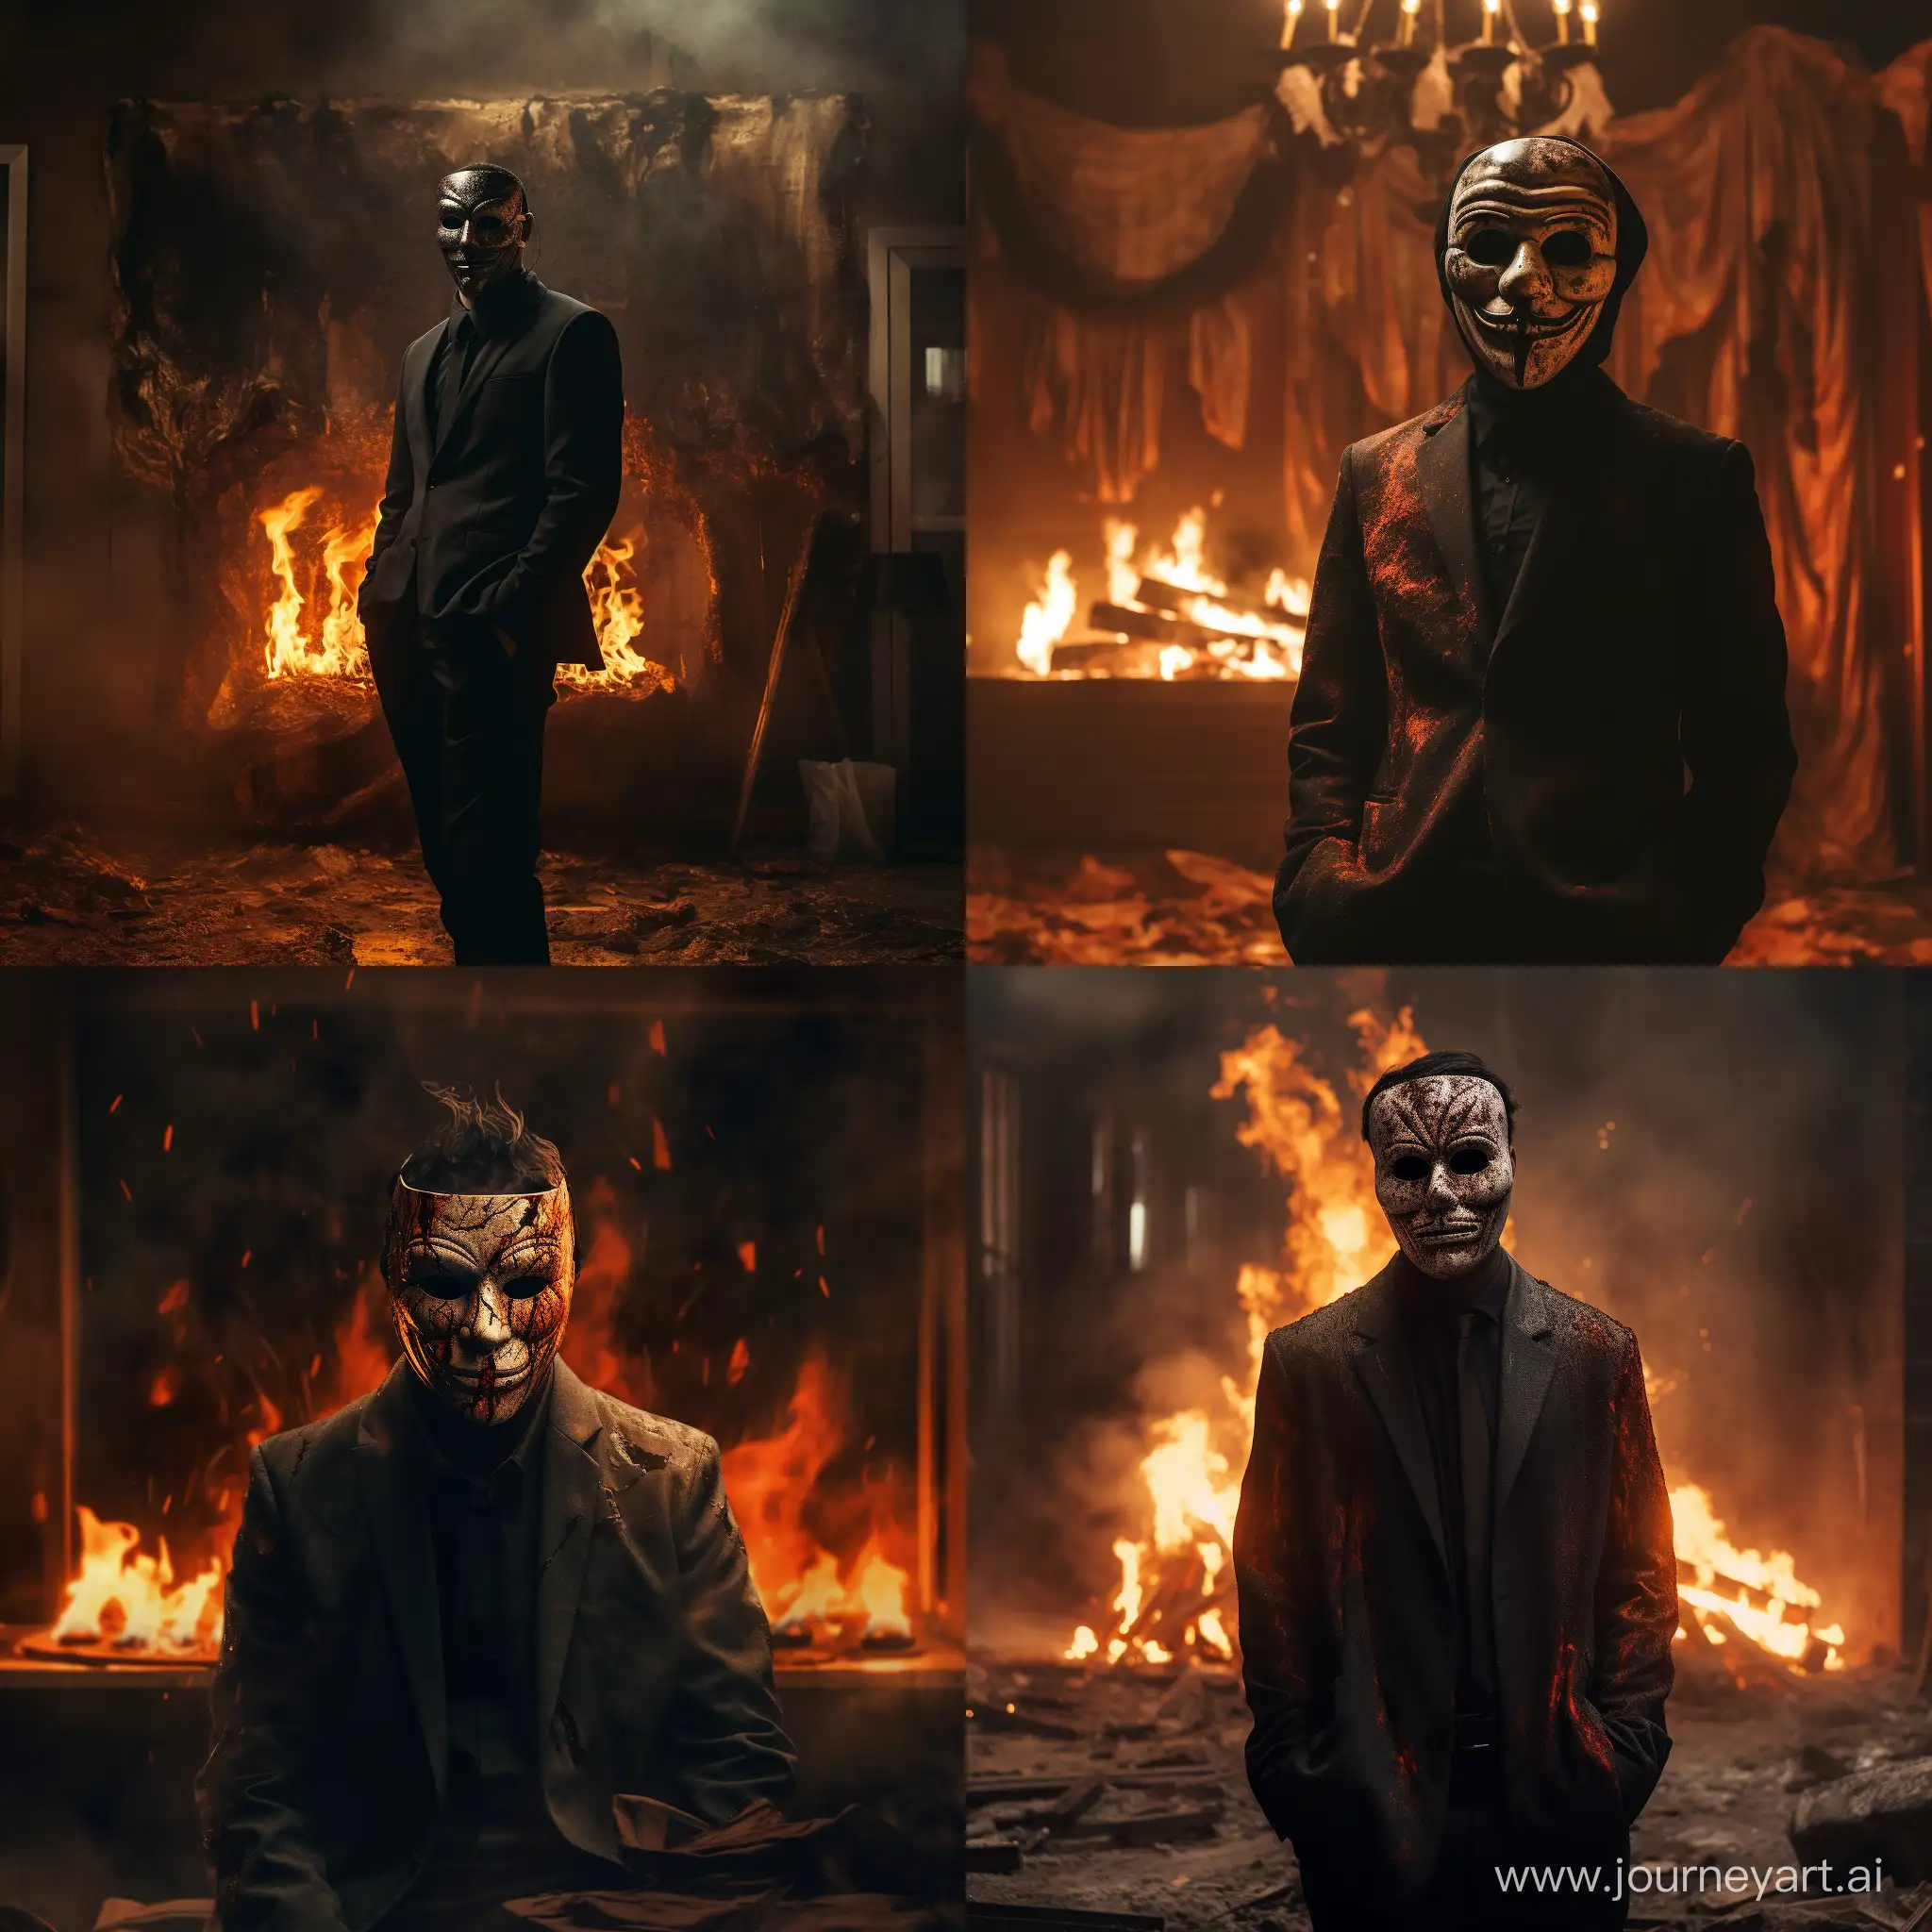 Anonymous-Masked-Man-in-a-Burning-Room